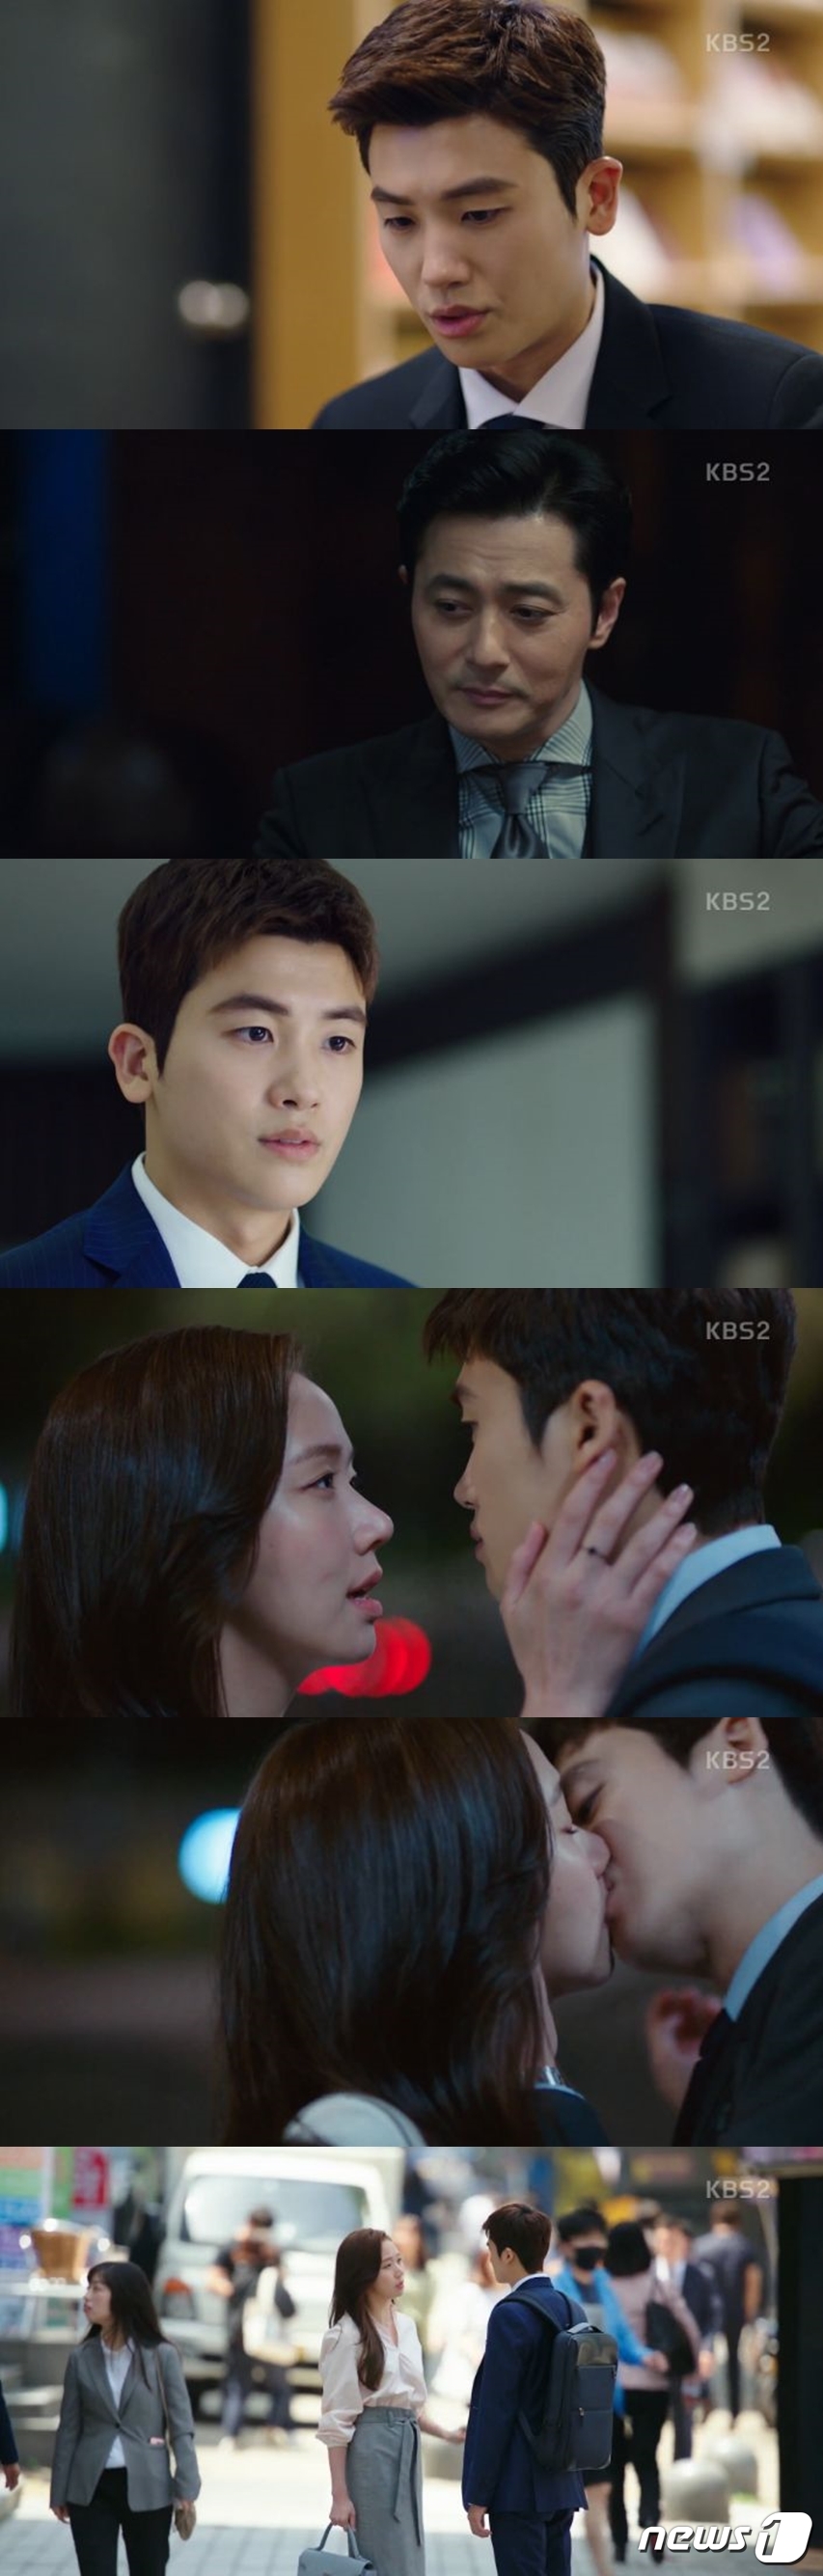 In the KBS2 drama Suits, which aired on the 30th, the appearance of Ko Yeon-woo (Park Hyeong-sik) and Ji-na Kim (Go Sung-hee) confirming their affection with a sweet kiss and solving the case by sharing their defense was broadcast.On this day, Kang Ha-yeon (Jin Hee-kyung) and Choi Kang-seok (Jang Dong-gun) expressed opposition to Hams return to the law firm. In particular, Choi Kang-seok said, I can not come back.I will stop it. He said, If the identity of the lawyer is revealed, Choi will be difficult. They already knew about Ji-na Kim (Go Sung-hee) and Ko Yeon-woos relationship.Choi said, Ko Yeon-woo hovers around Ji-na Kim, we have to care more before we get closer to each other.Ko was given a solo case by Choi Kang-seok.Choi Kang-seok advised, Do not pretend to be good, do well, only think about winning. He advised, Find out the others desires and find weaknesses.Ko Yeon-woos case was a copyright infringement lawsuit claiming that the best-selling novel was his work.However, Ko Yeon-woo was belatedly aware that the defendant was raped by the publishers representative and asked Ji-na Kim for help.Lee Jung In said, Im not going to come and reveal the rape now, not to apologize, but to my idea without a word of discussion.Ji-na Kim said, The lawyer will be able to solve it on his way home with Ko Yeon-woo.Ko Yeon-woo said, Do not you know me well? Ji-na Kim and Ko Yeon-woo kissed me affectionately.Meanwhile, Ko Yeon-woo and Ji-na Kim proved their ability to solve copyright infringement and sexual assault at the same time in a meeting with Lee Jung In and the publisher representative.